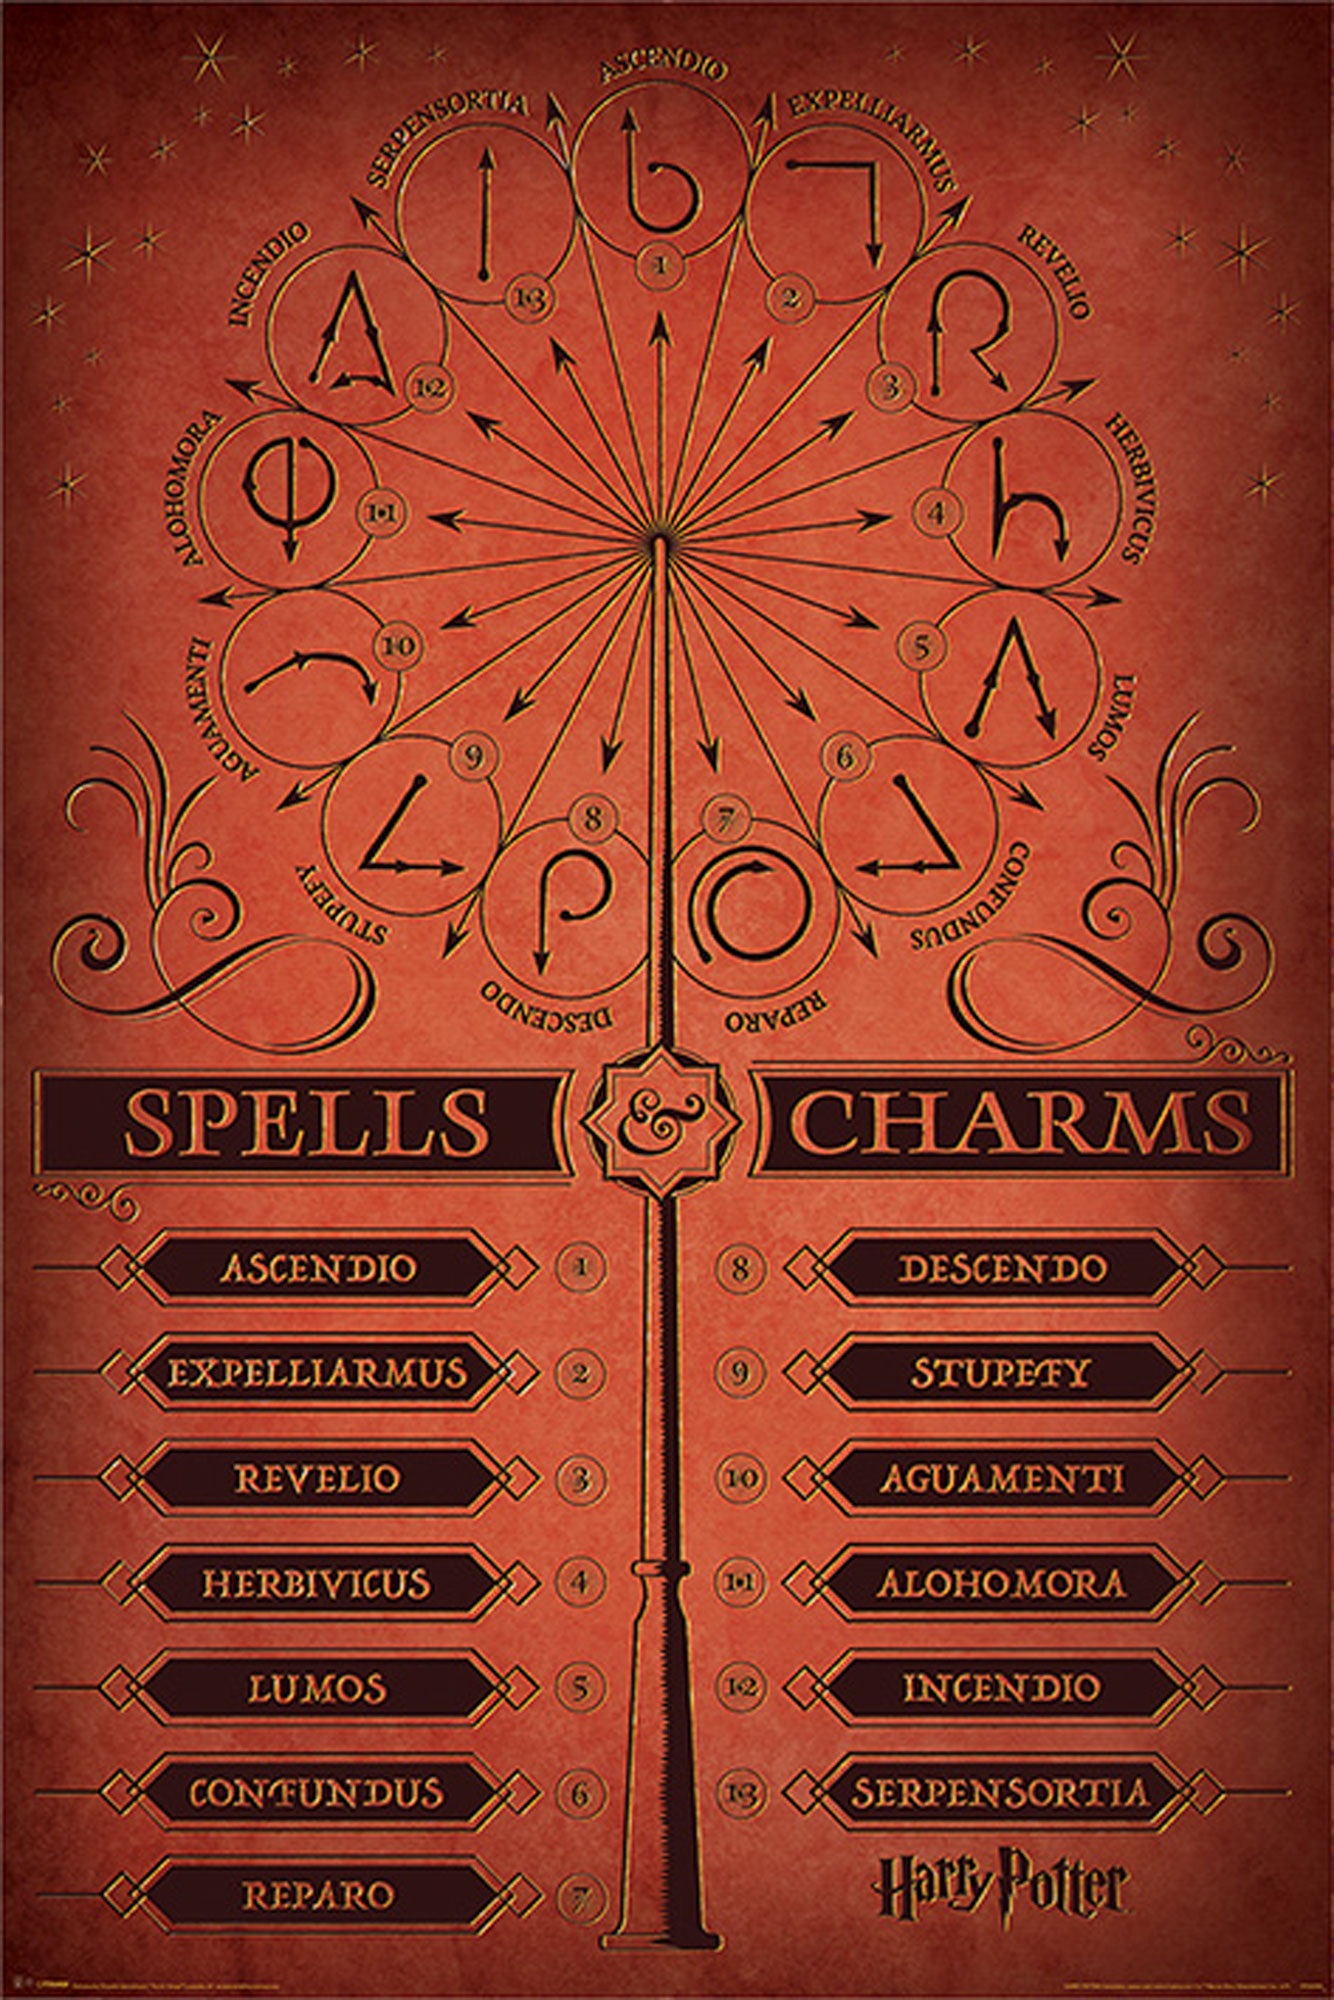 Harry Potter - Spells & Charms